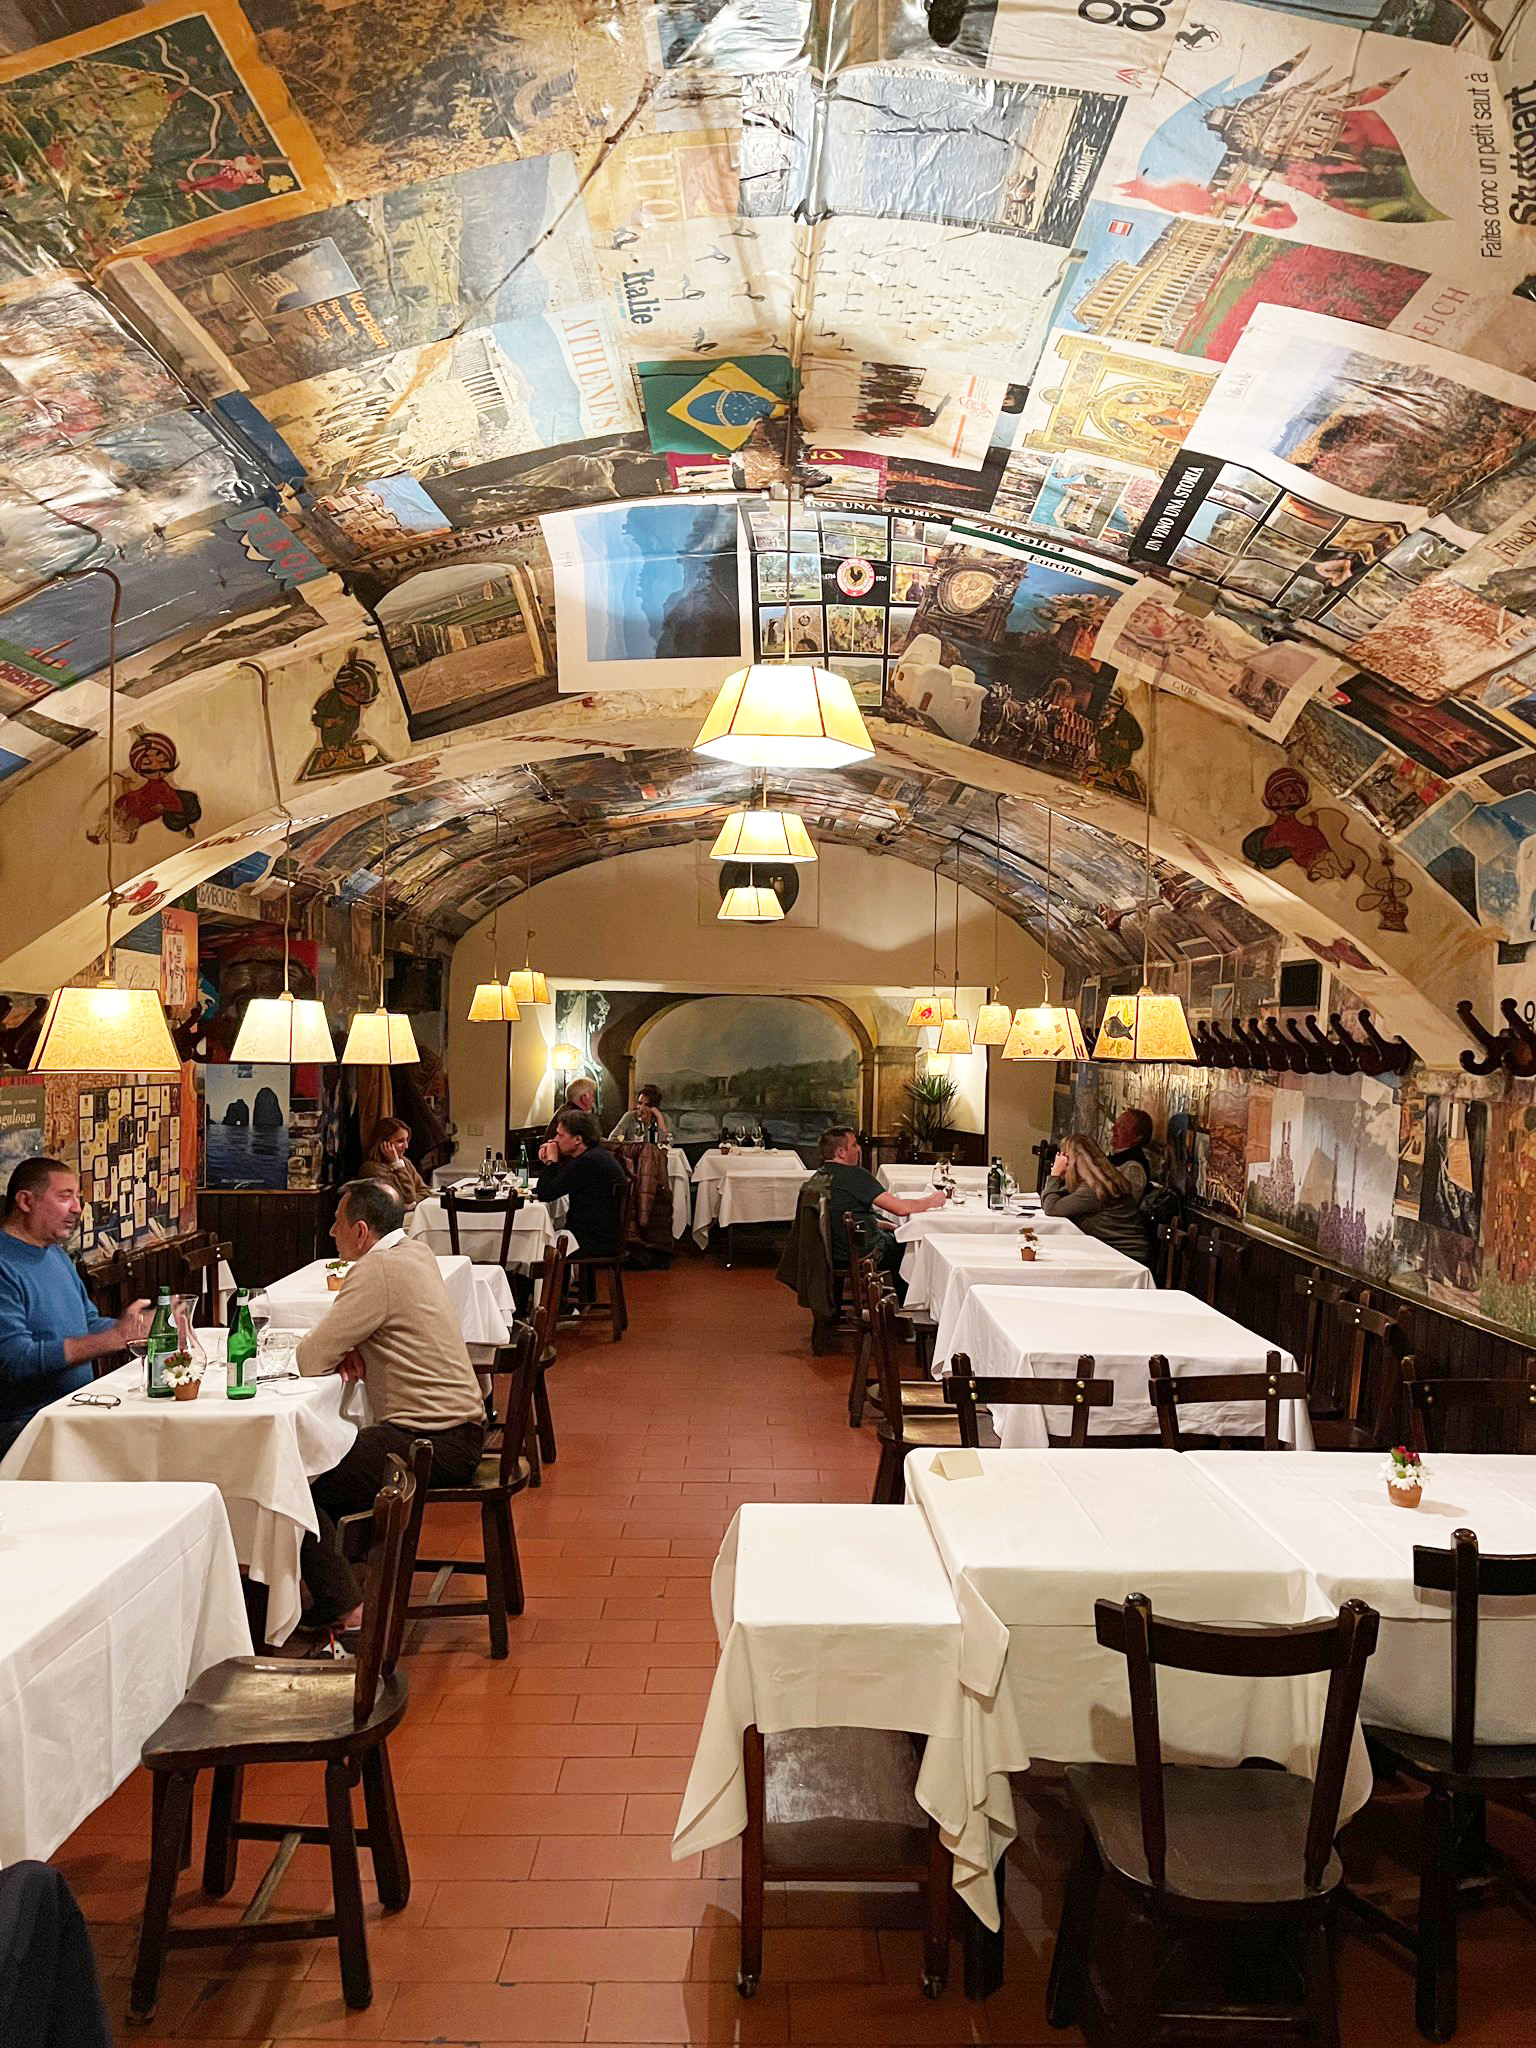 A restaurant interior where the arched, cave-like ceiling and walls are covered with old posters, diners sit at white tablecloth-covered tables beneath pendant lights.